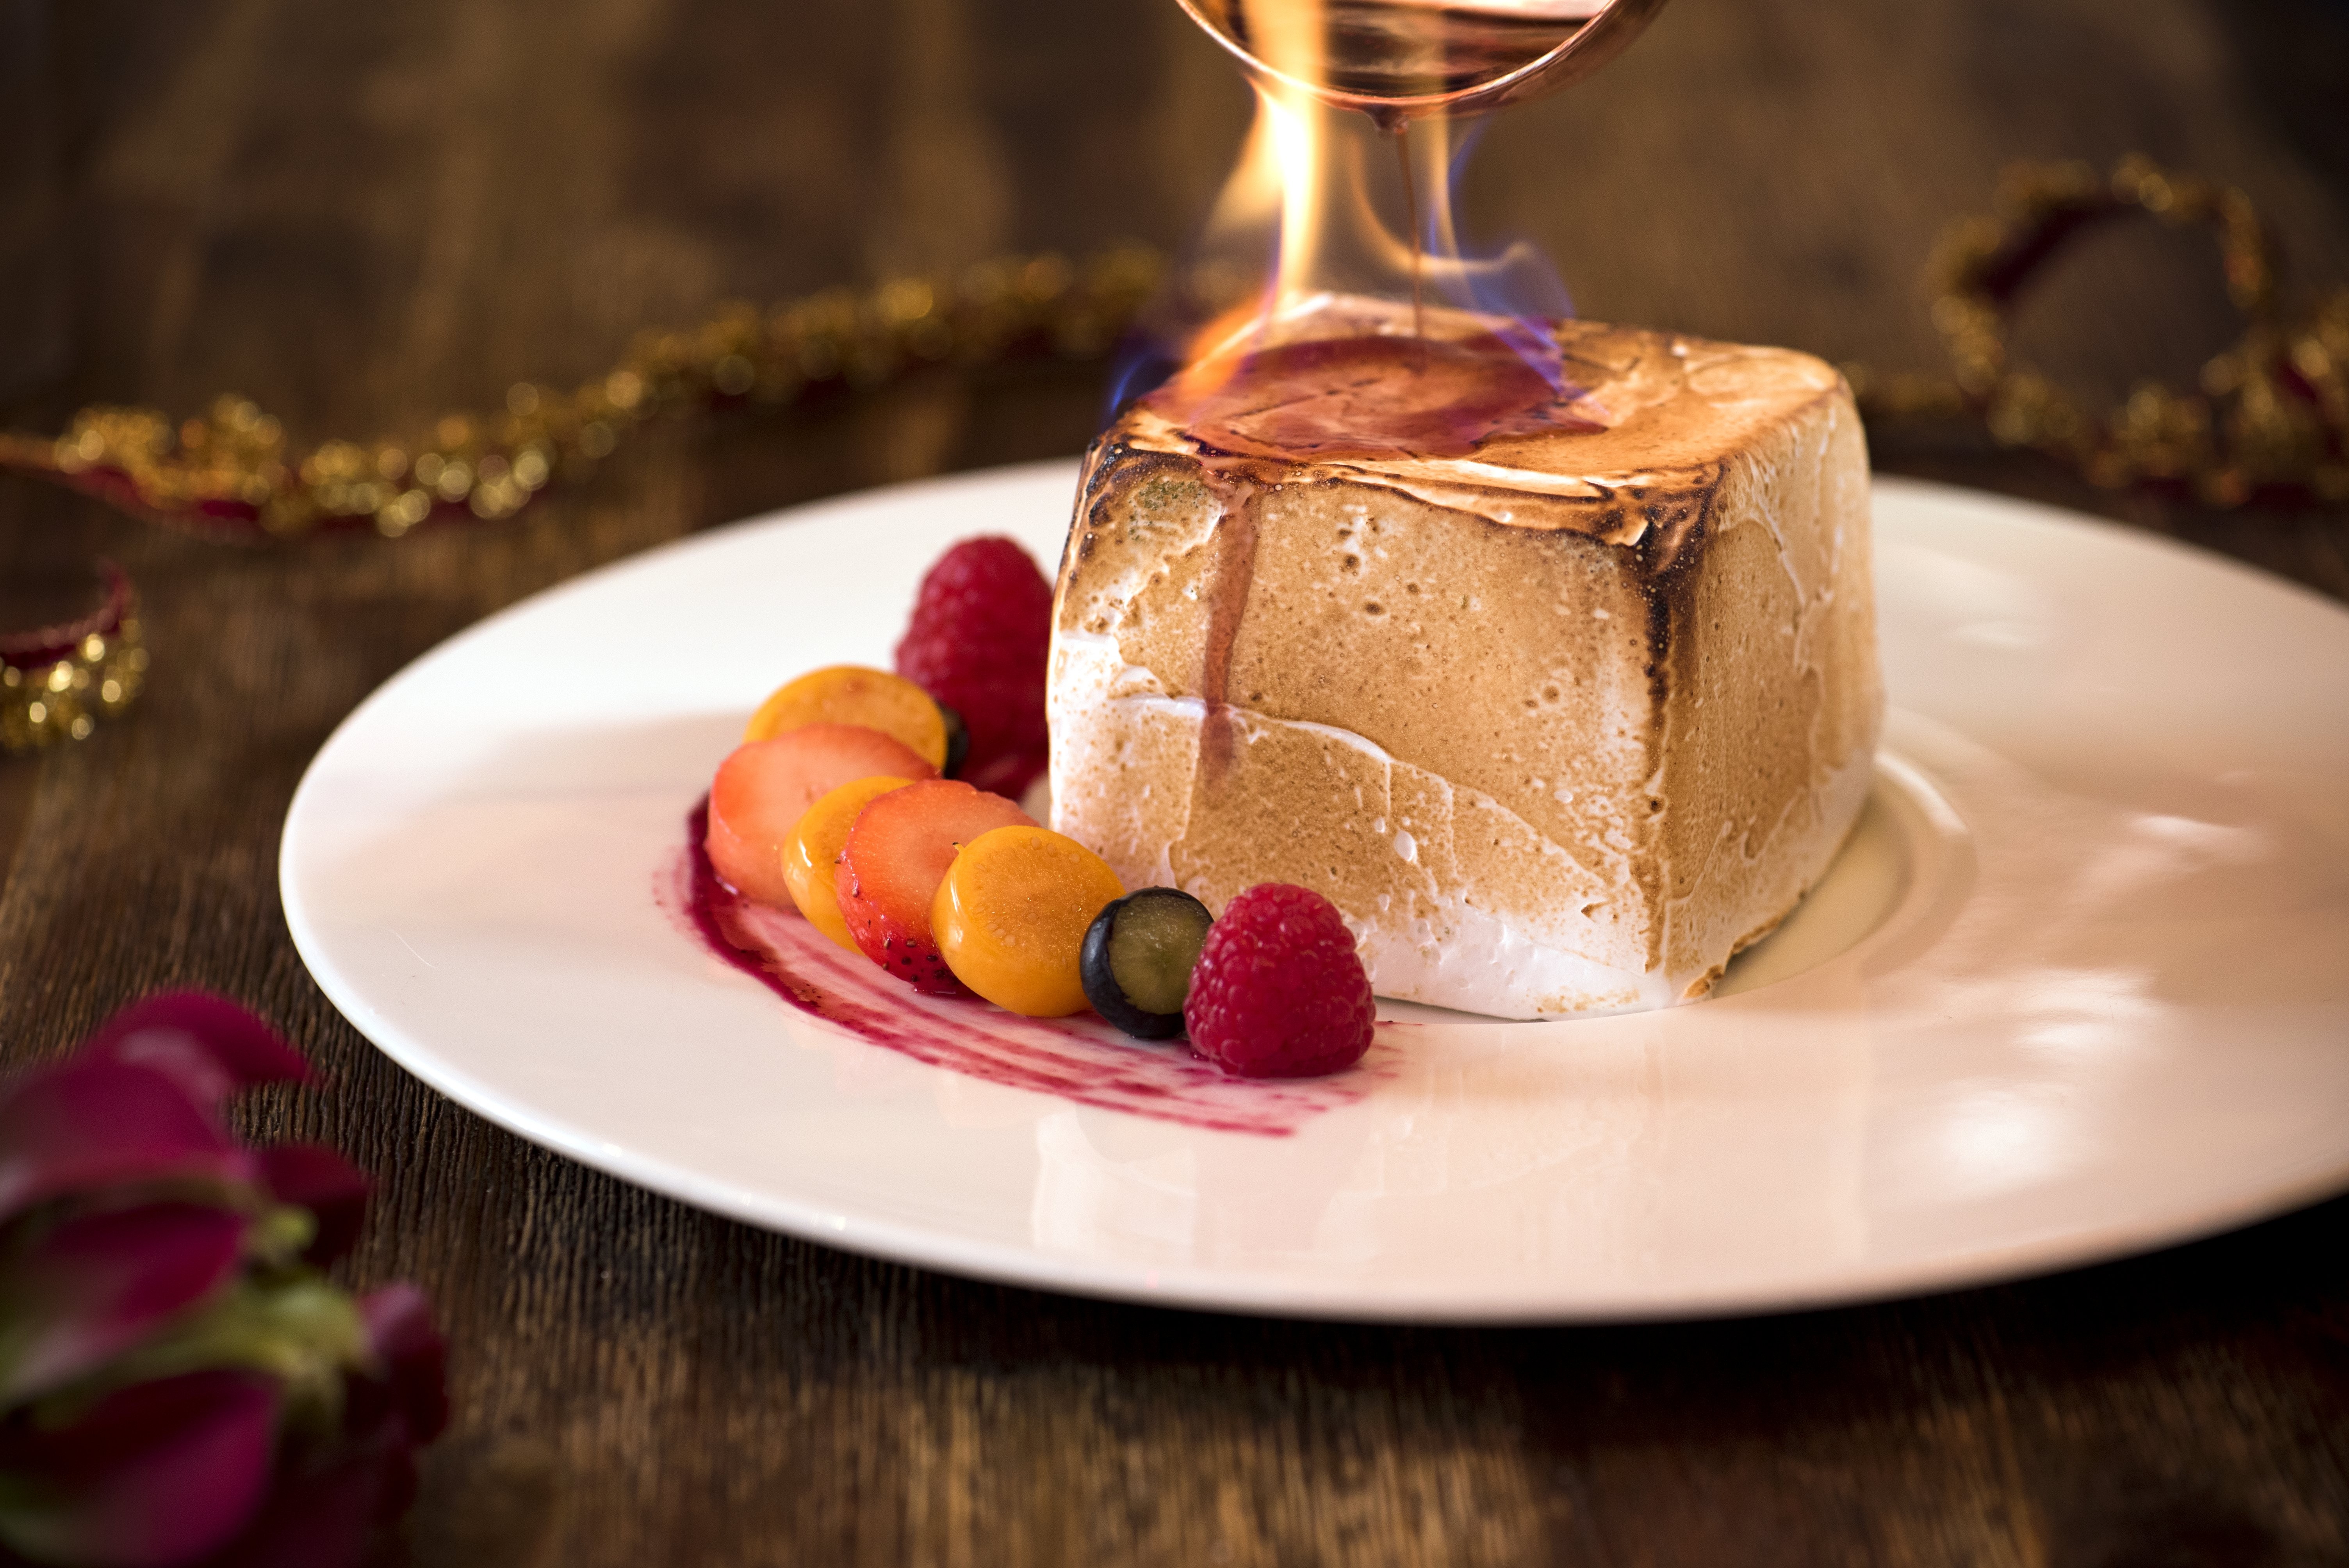 Restaurants in Hong Kong and Macau are gearing up for New Year’s Eve. Wooloomooloo Wan Chai is offering baked Alaska for the holiday.